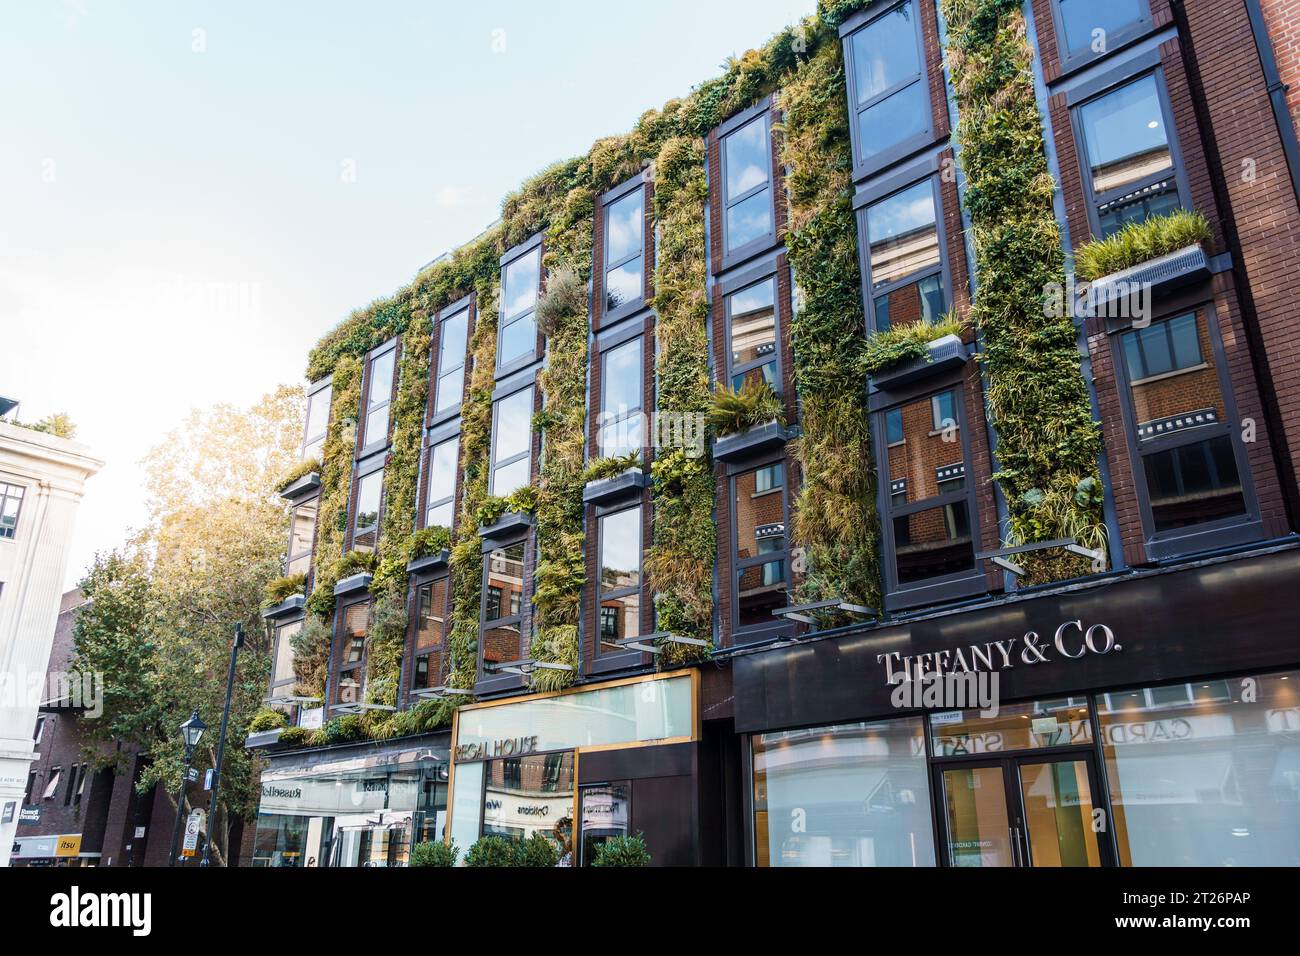 LONDON, UK - August 25, 2023: Building with green facade in Covent Garden area. stores Stock Photo